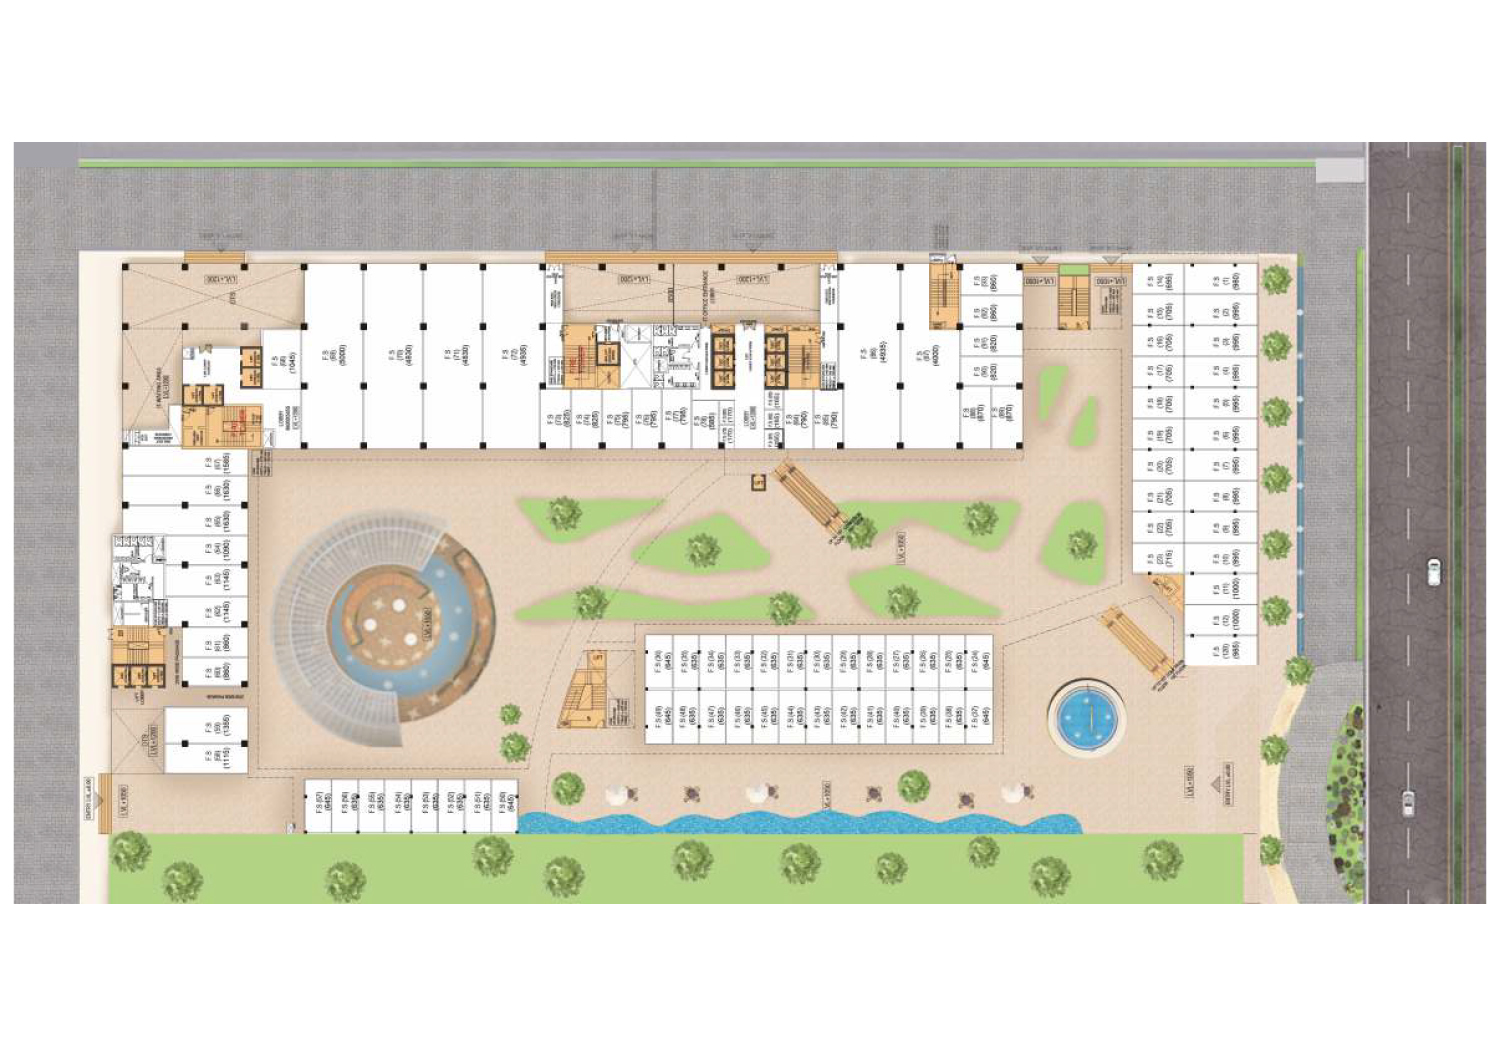 Maasters  Capitol Avenue Site Map